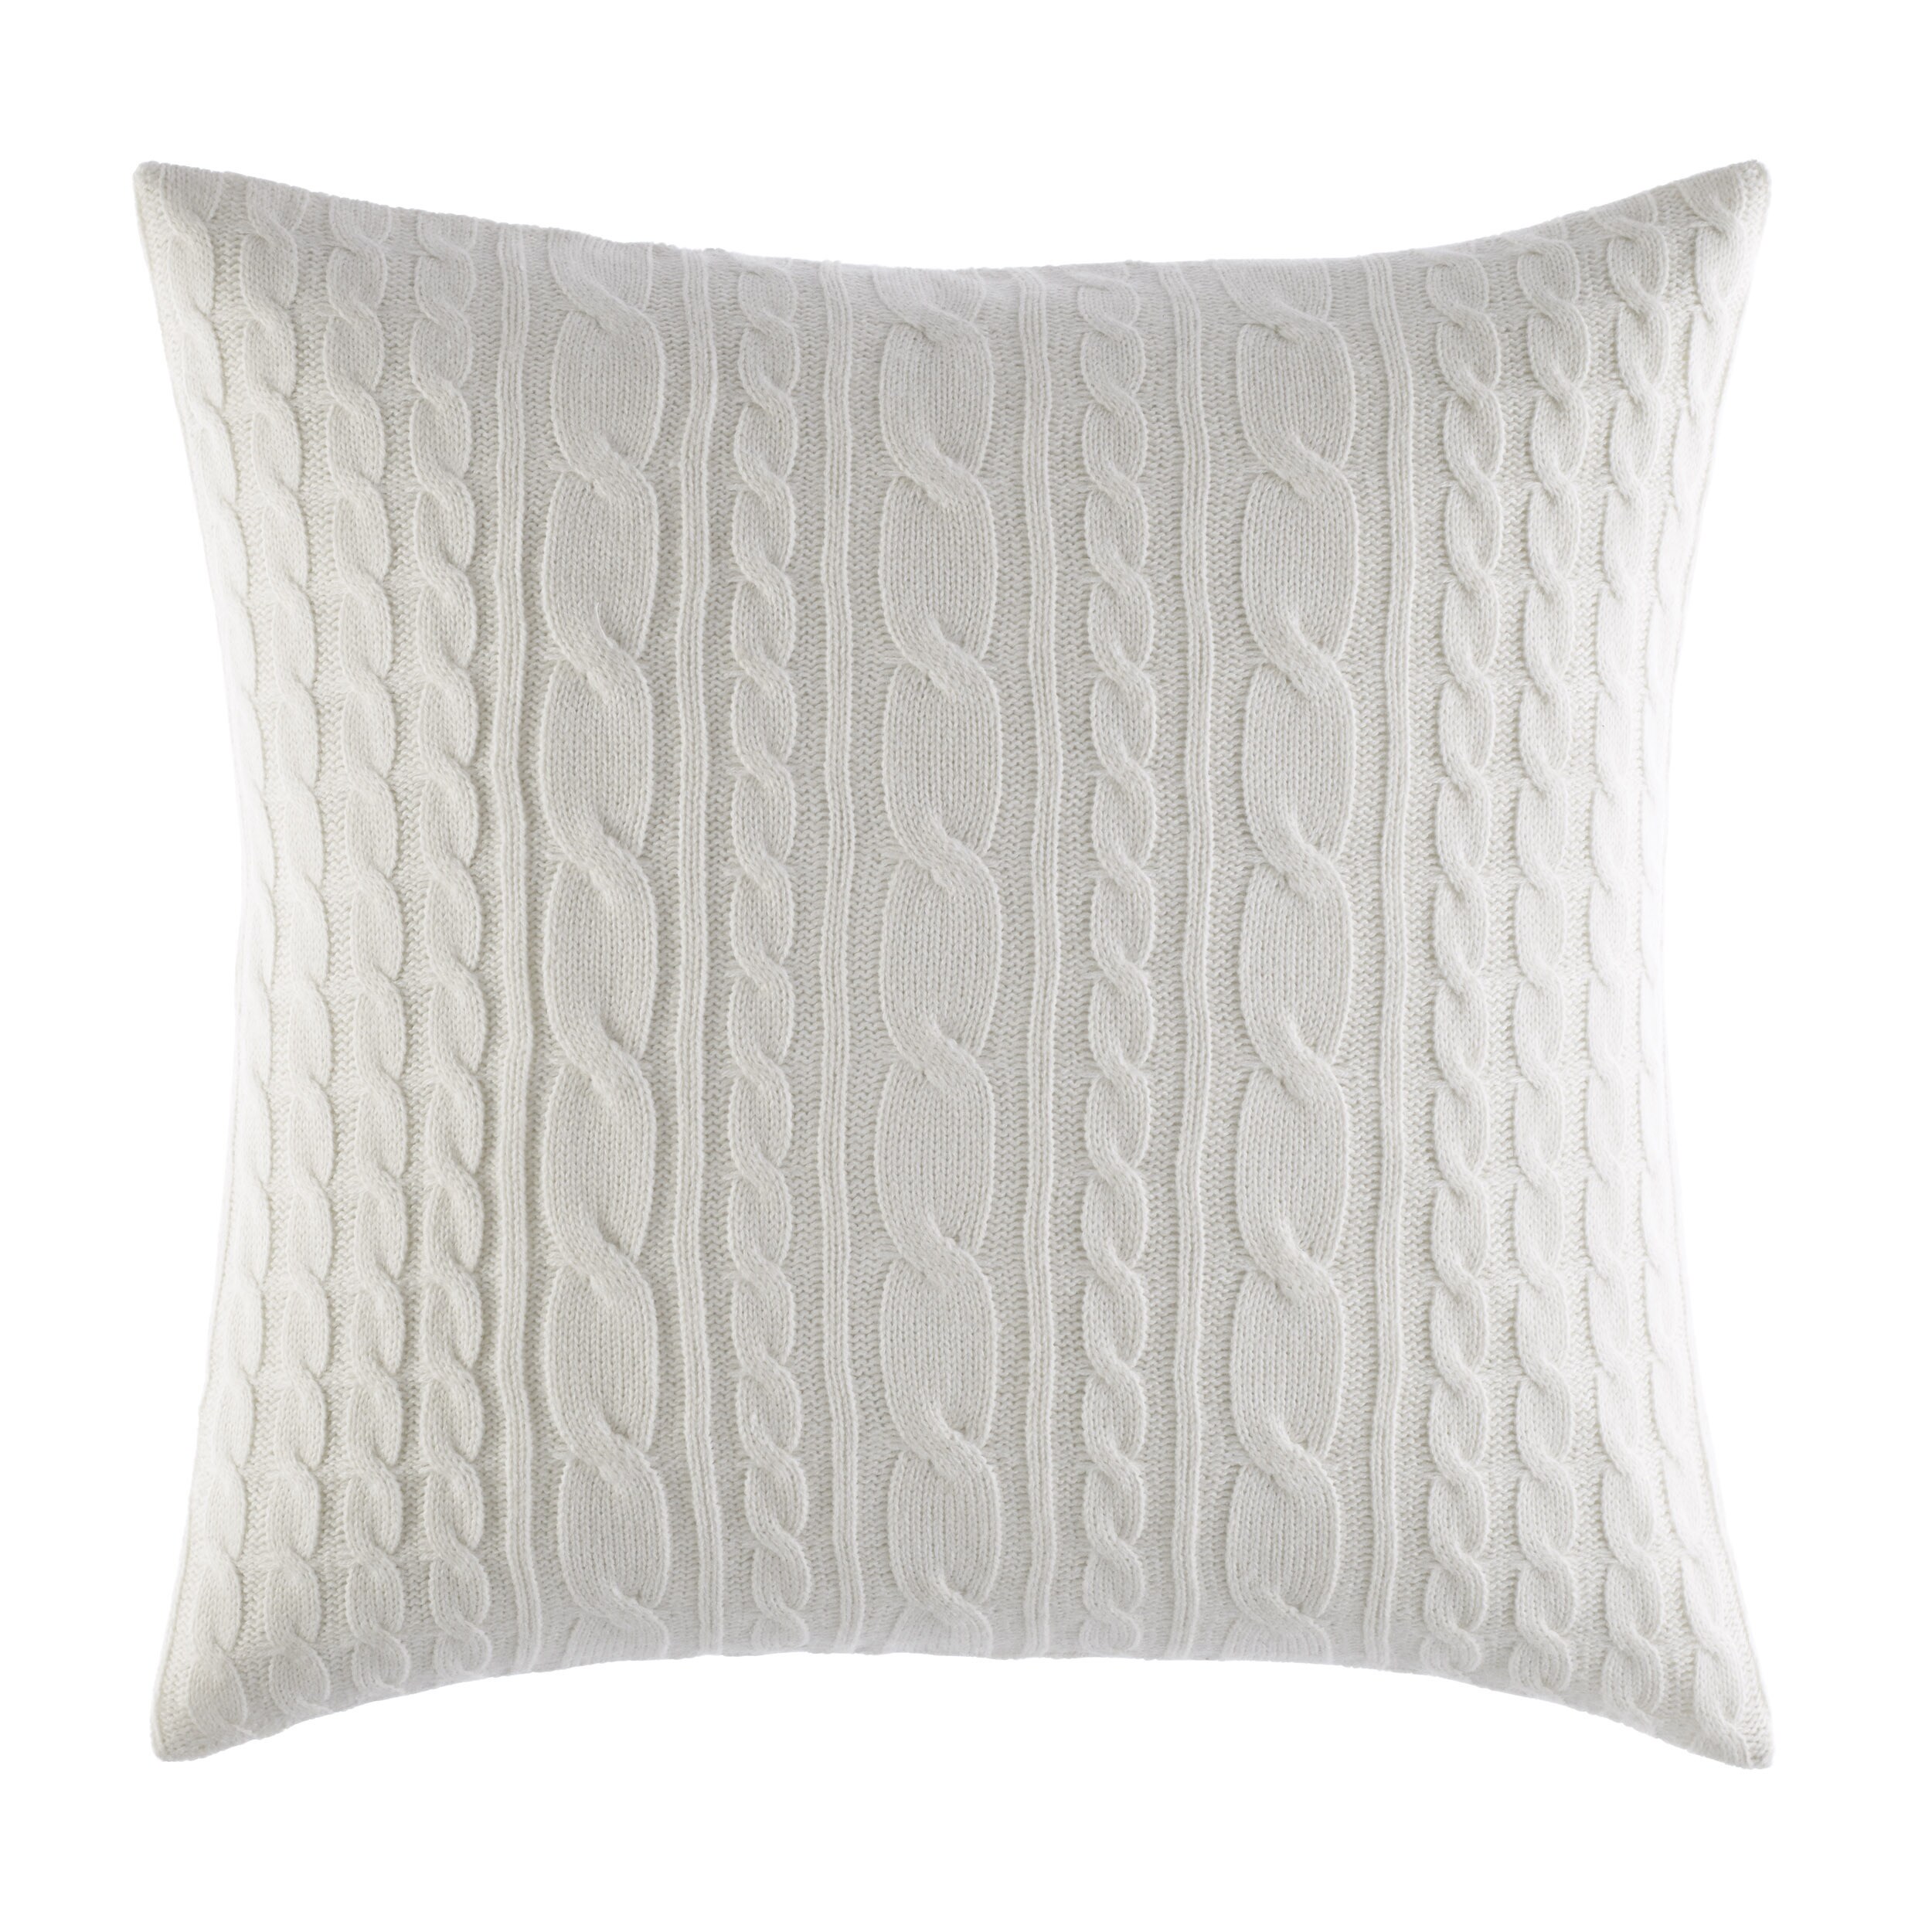 Shop Laura Ashley Ivory Cable Knit Decorative Pillow Free